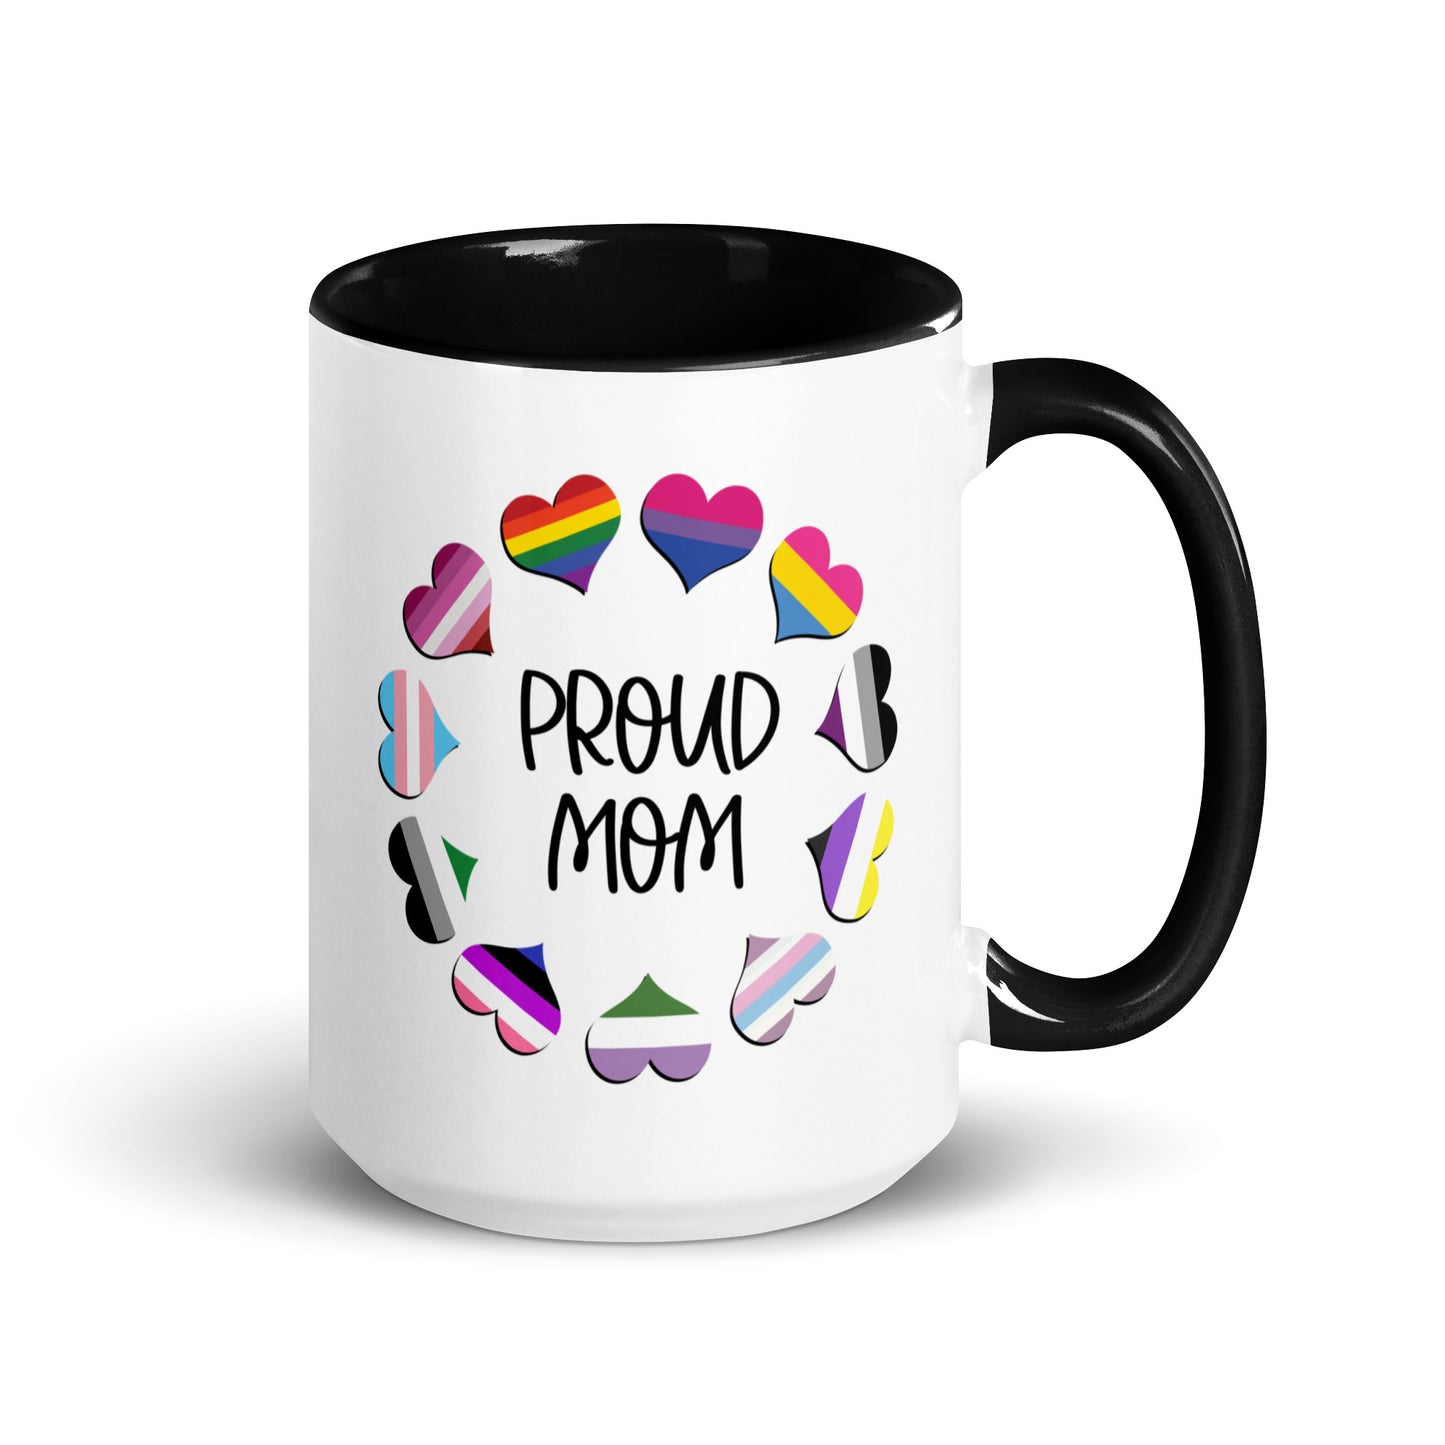 Proud Mom Mug in two sizes